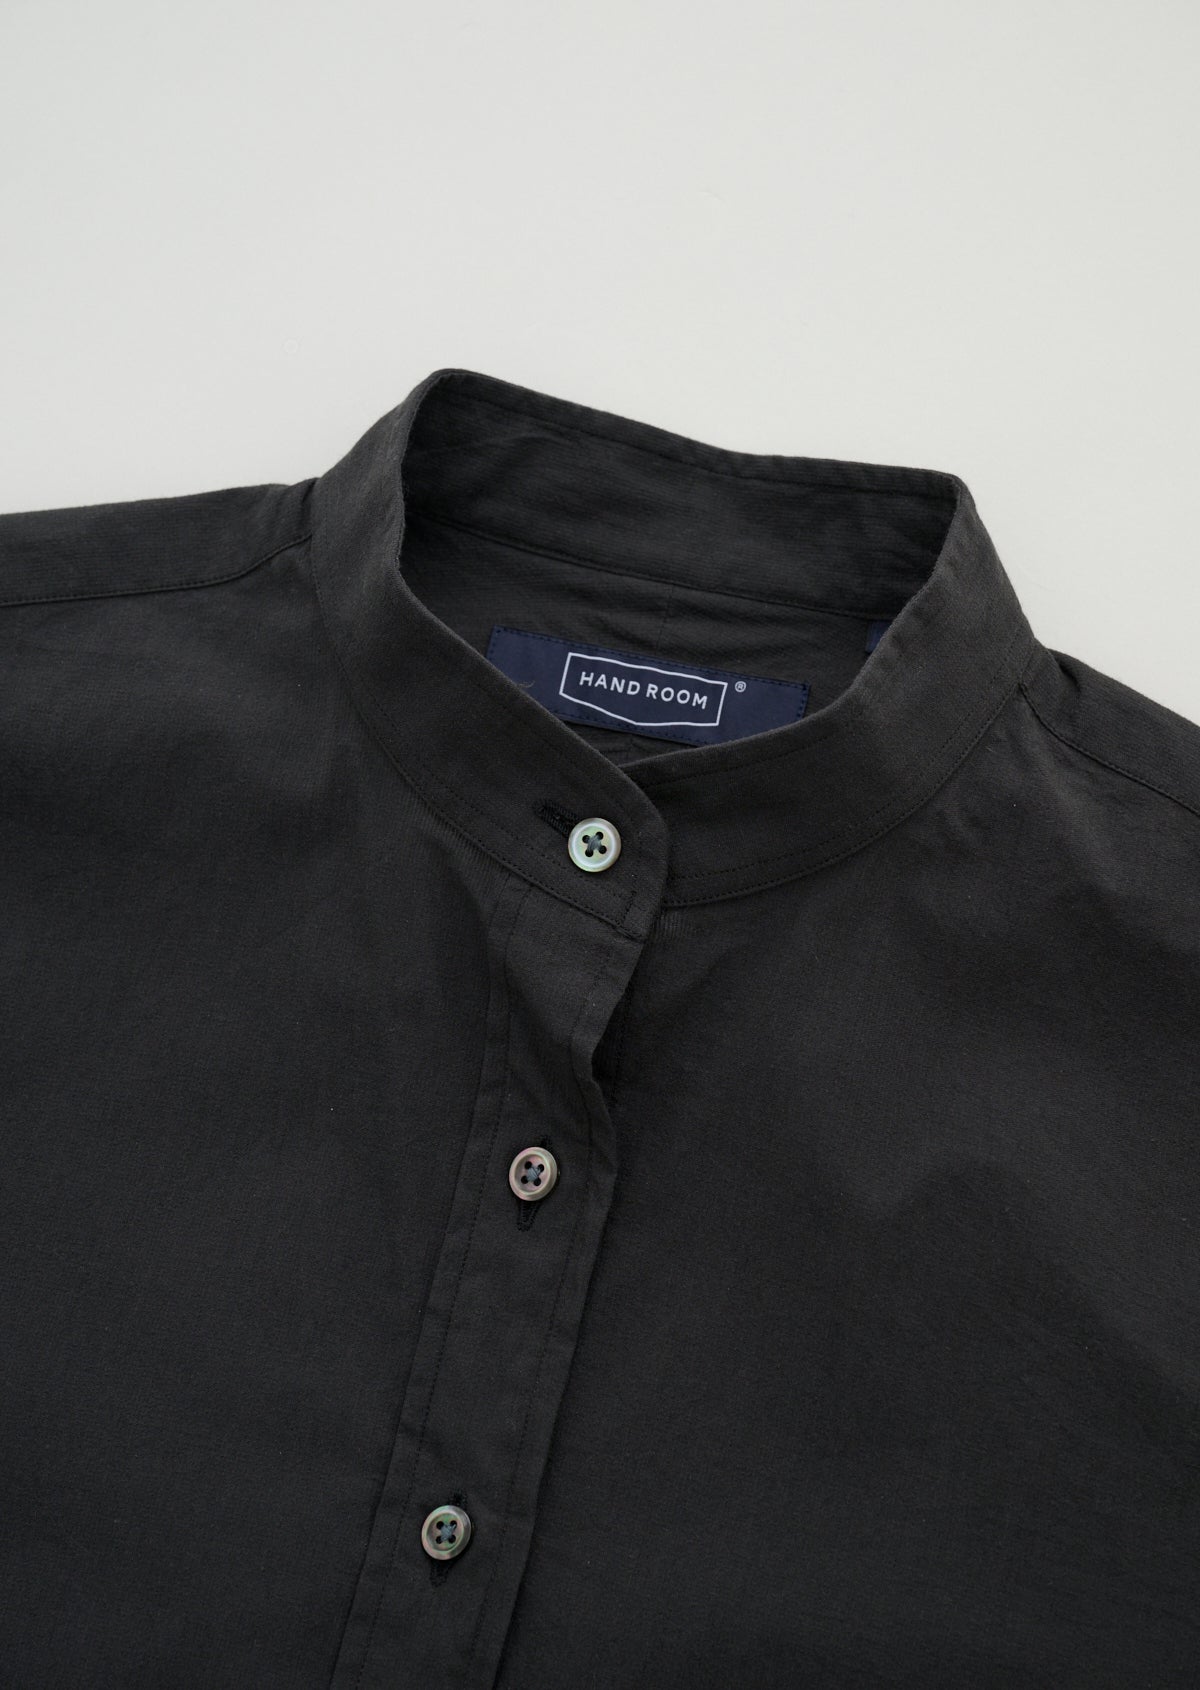 120/2 BROAD CLASSIC FRONT SHIRT NAVY 8211-1101